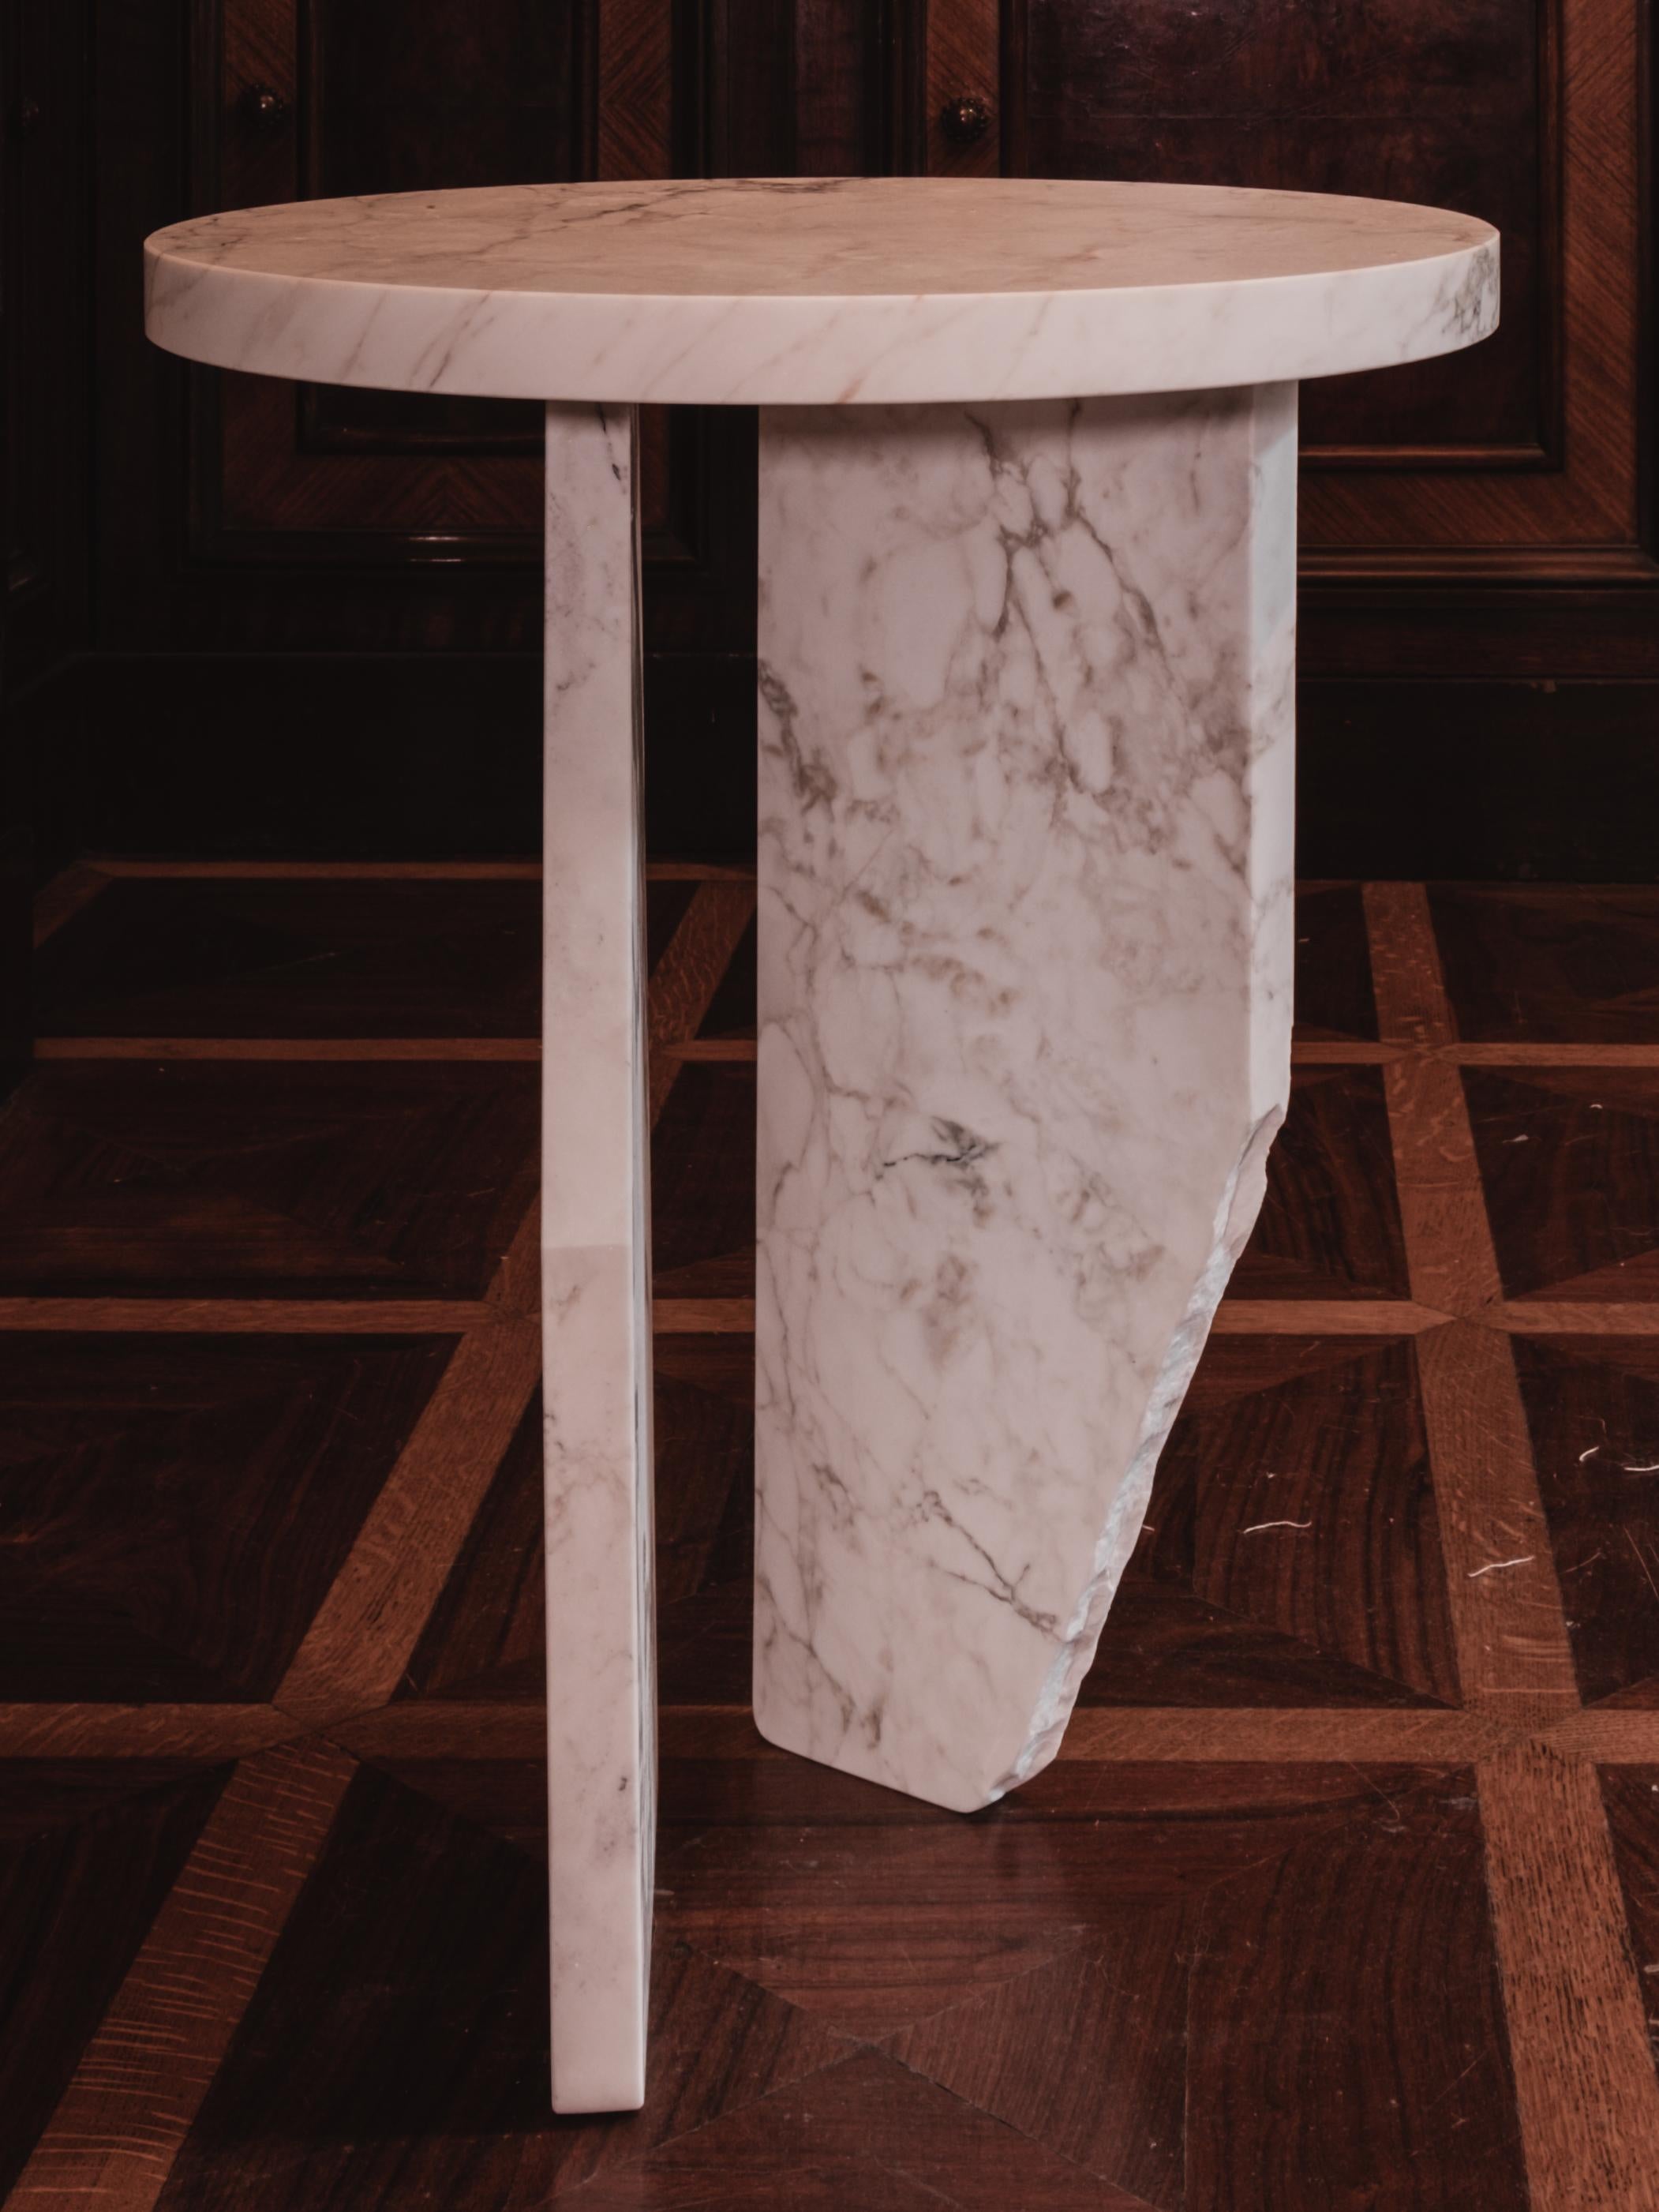 Ala Cocktail table by Karu
Dimensions: Ø 40 x H 50 cm.
Materials: Handcrafted Calacatta gold marble.
*Price is just for the table.

Calacatta Gold Marble from the Cathedrals of Carrara, Italy. Exposed edges reveal the stone’s character, carved